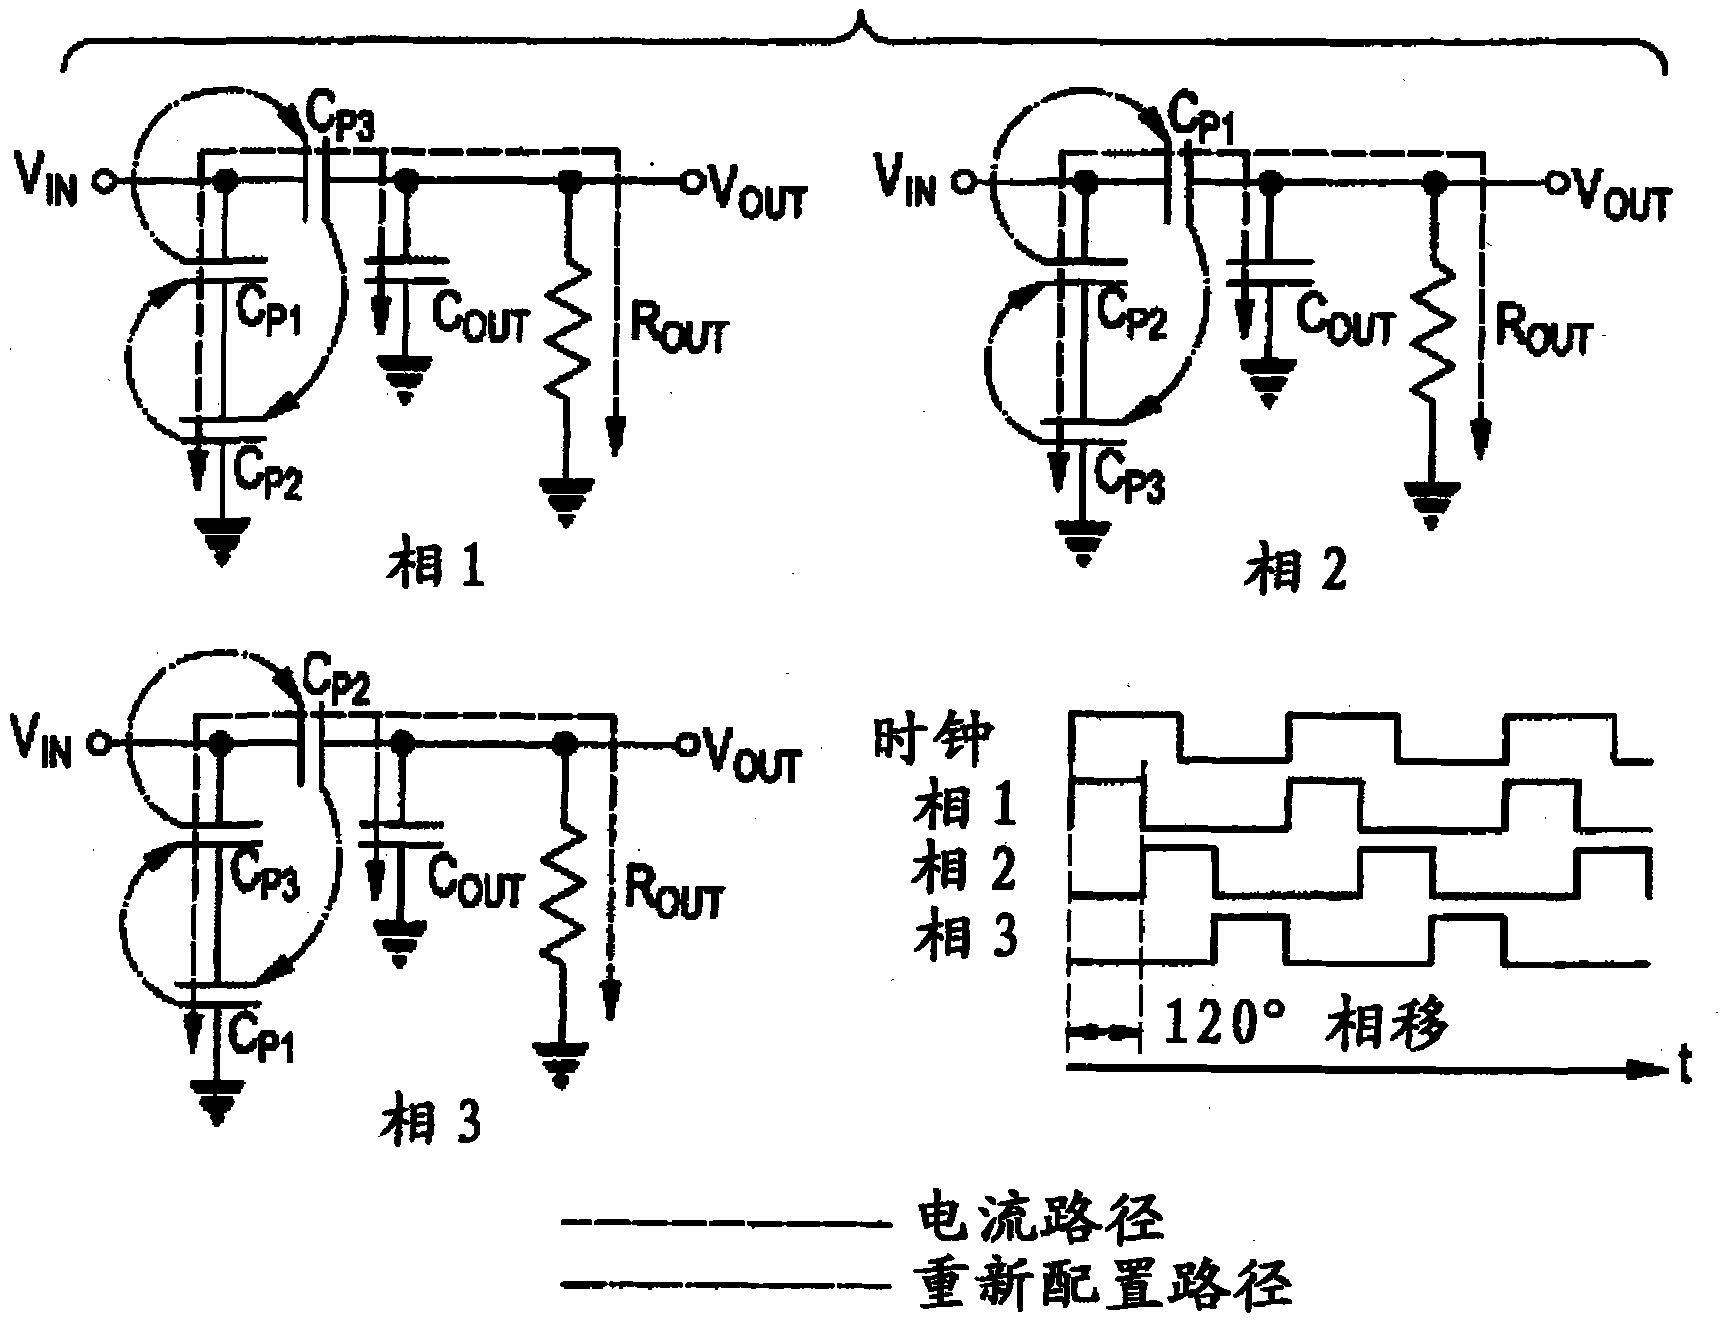 Adaptive-gain step-up/down switched-capacitor dc/dc converters